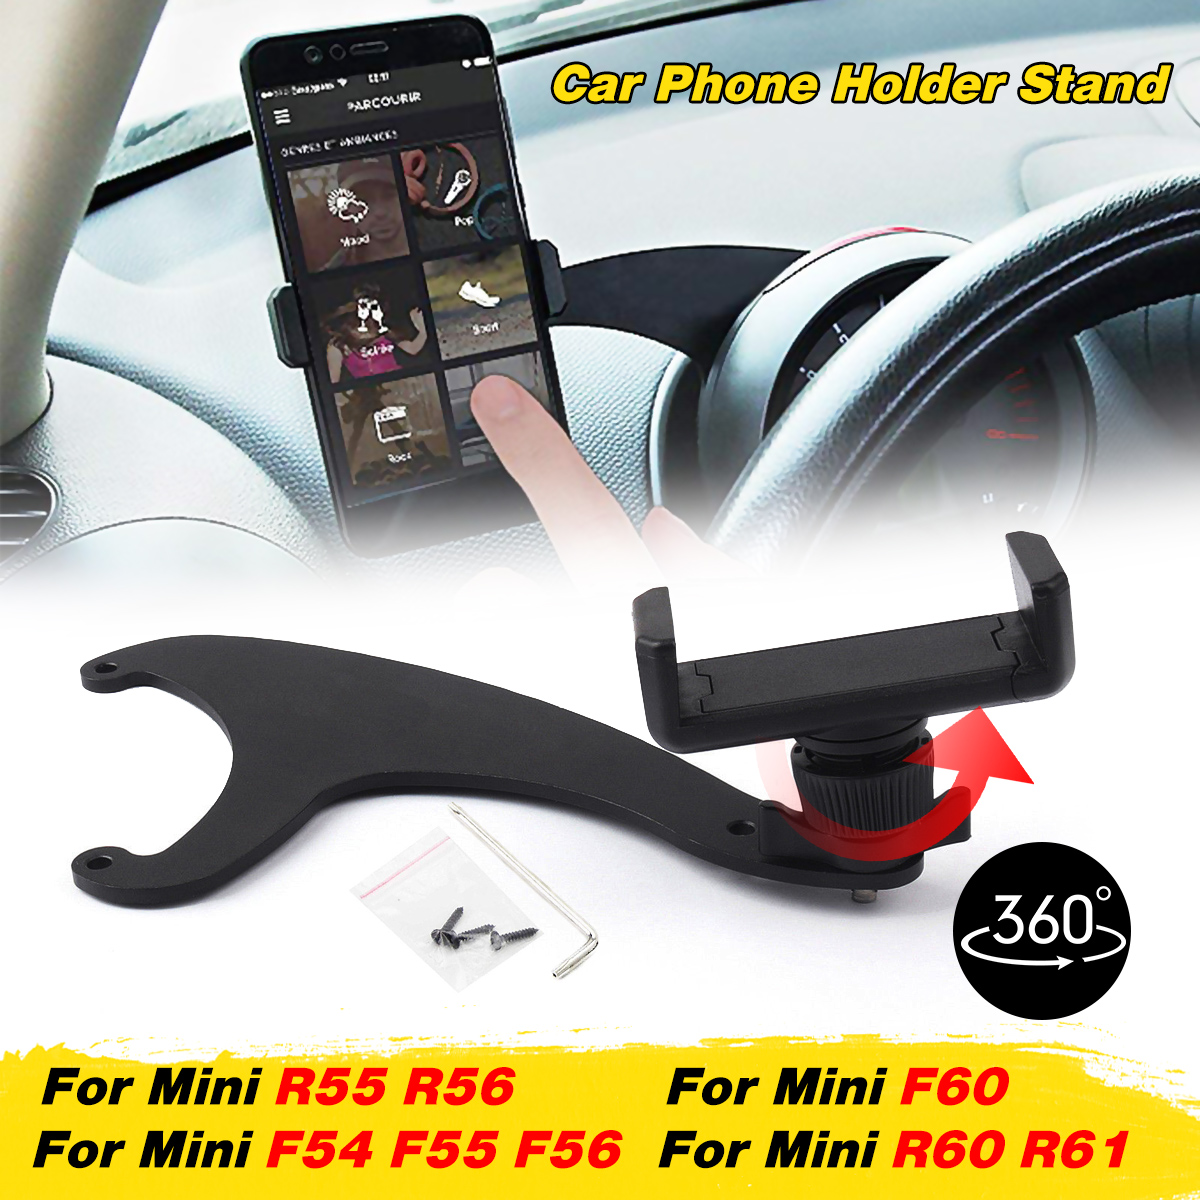 Bakeey-360deg-Rotation-Car-Phone-Mount-Cradle-Holder-Stand-for-Mini-Cooper-R60R61-R55R56-F60-1637156-3